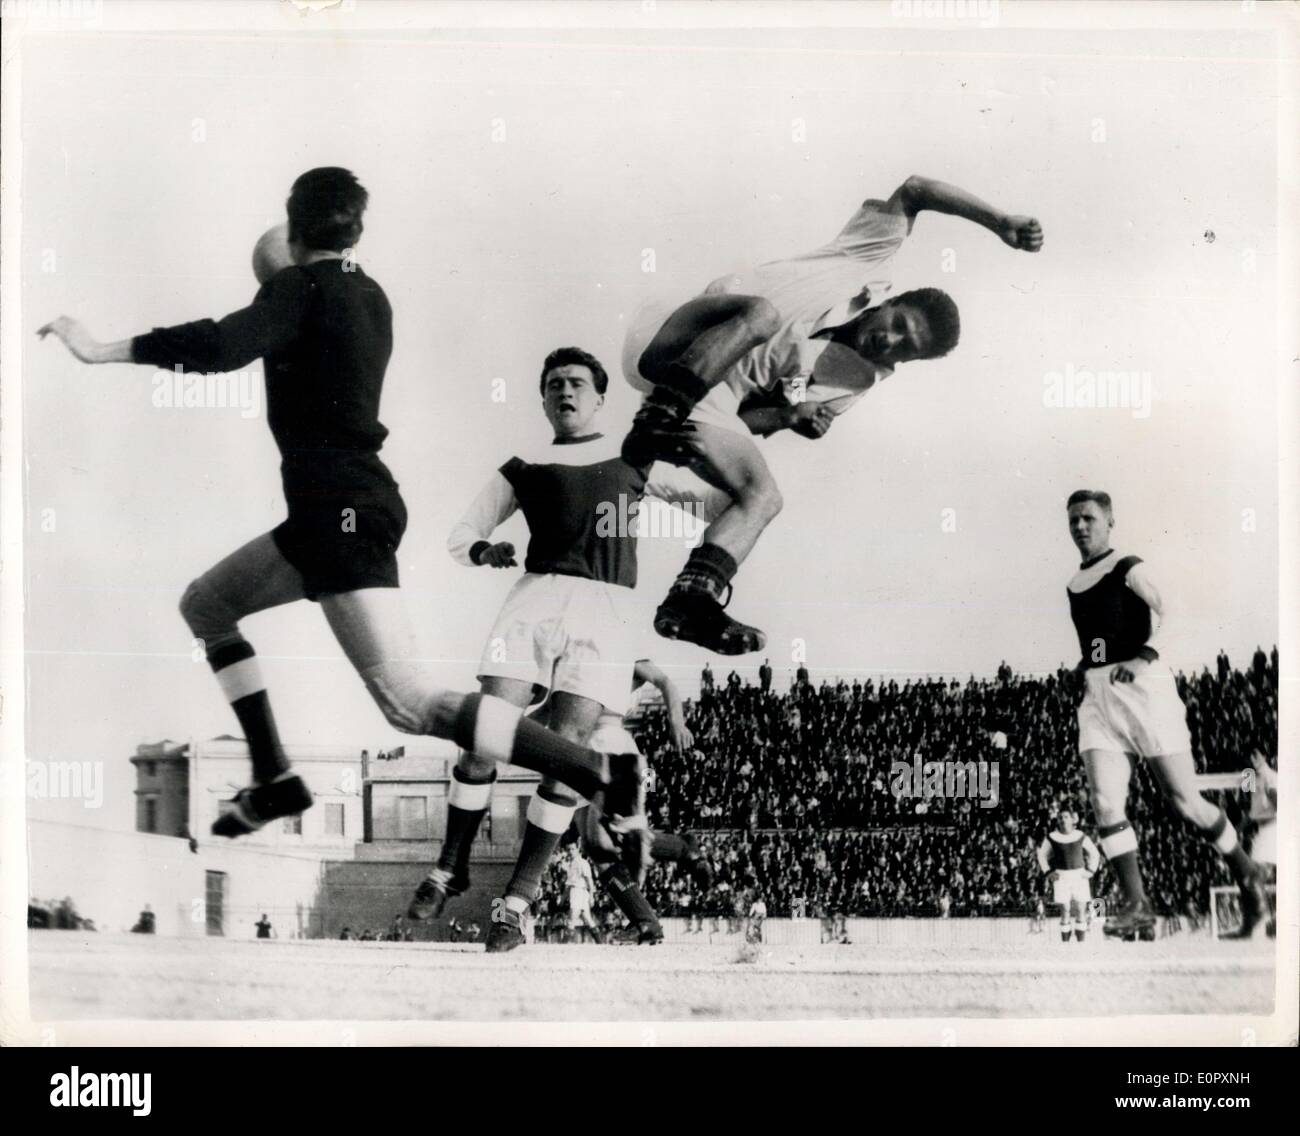 Apr. 27, 1957 - Action. The ?Free Hungarian? football team made up of well known refugee footballers, beat the Greek team Ethnikos by seven goals to win in Athens. Photo Shows: The Free Hungarian goalkeeper gets the ball away from an agile Ethnikos player, during the match. Stock Photo